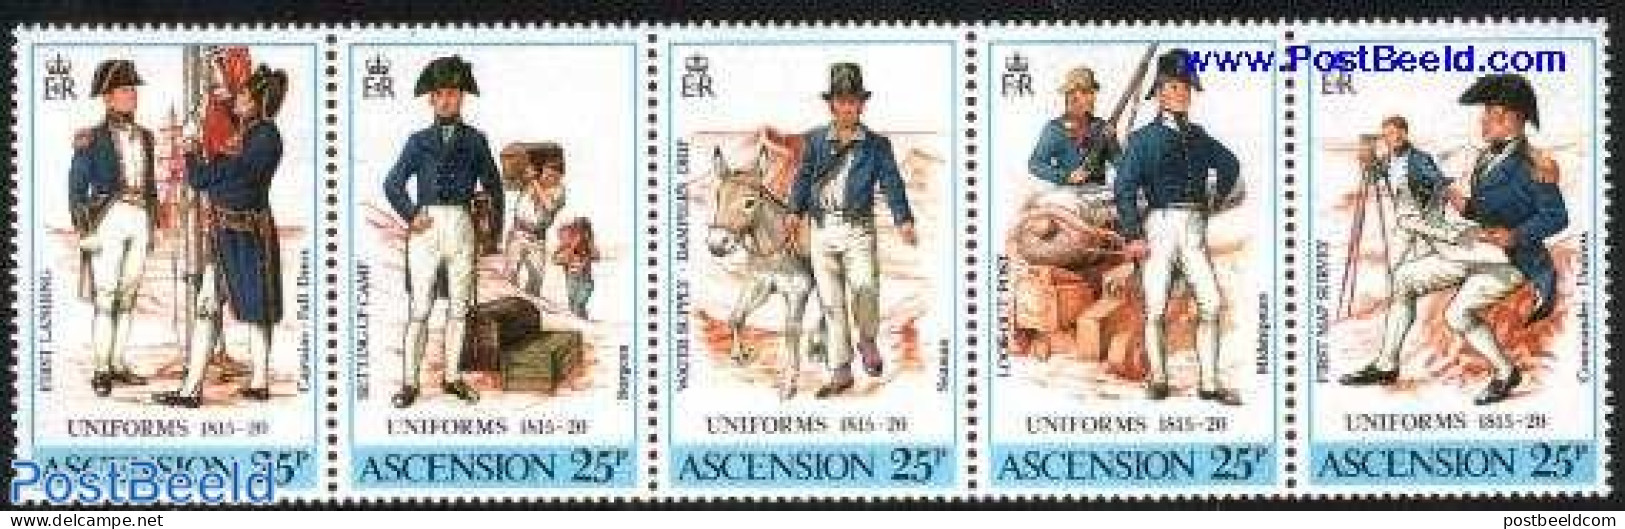 Ascension 1987 Royal Navy Uniforms 5v [::::], Mint NH, Science - Various - Weights & Measures - Uniforms - Disfraces